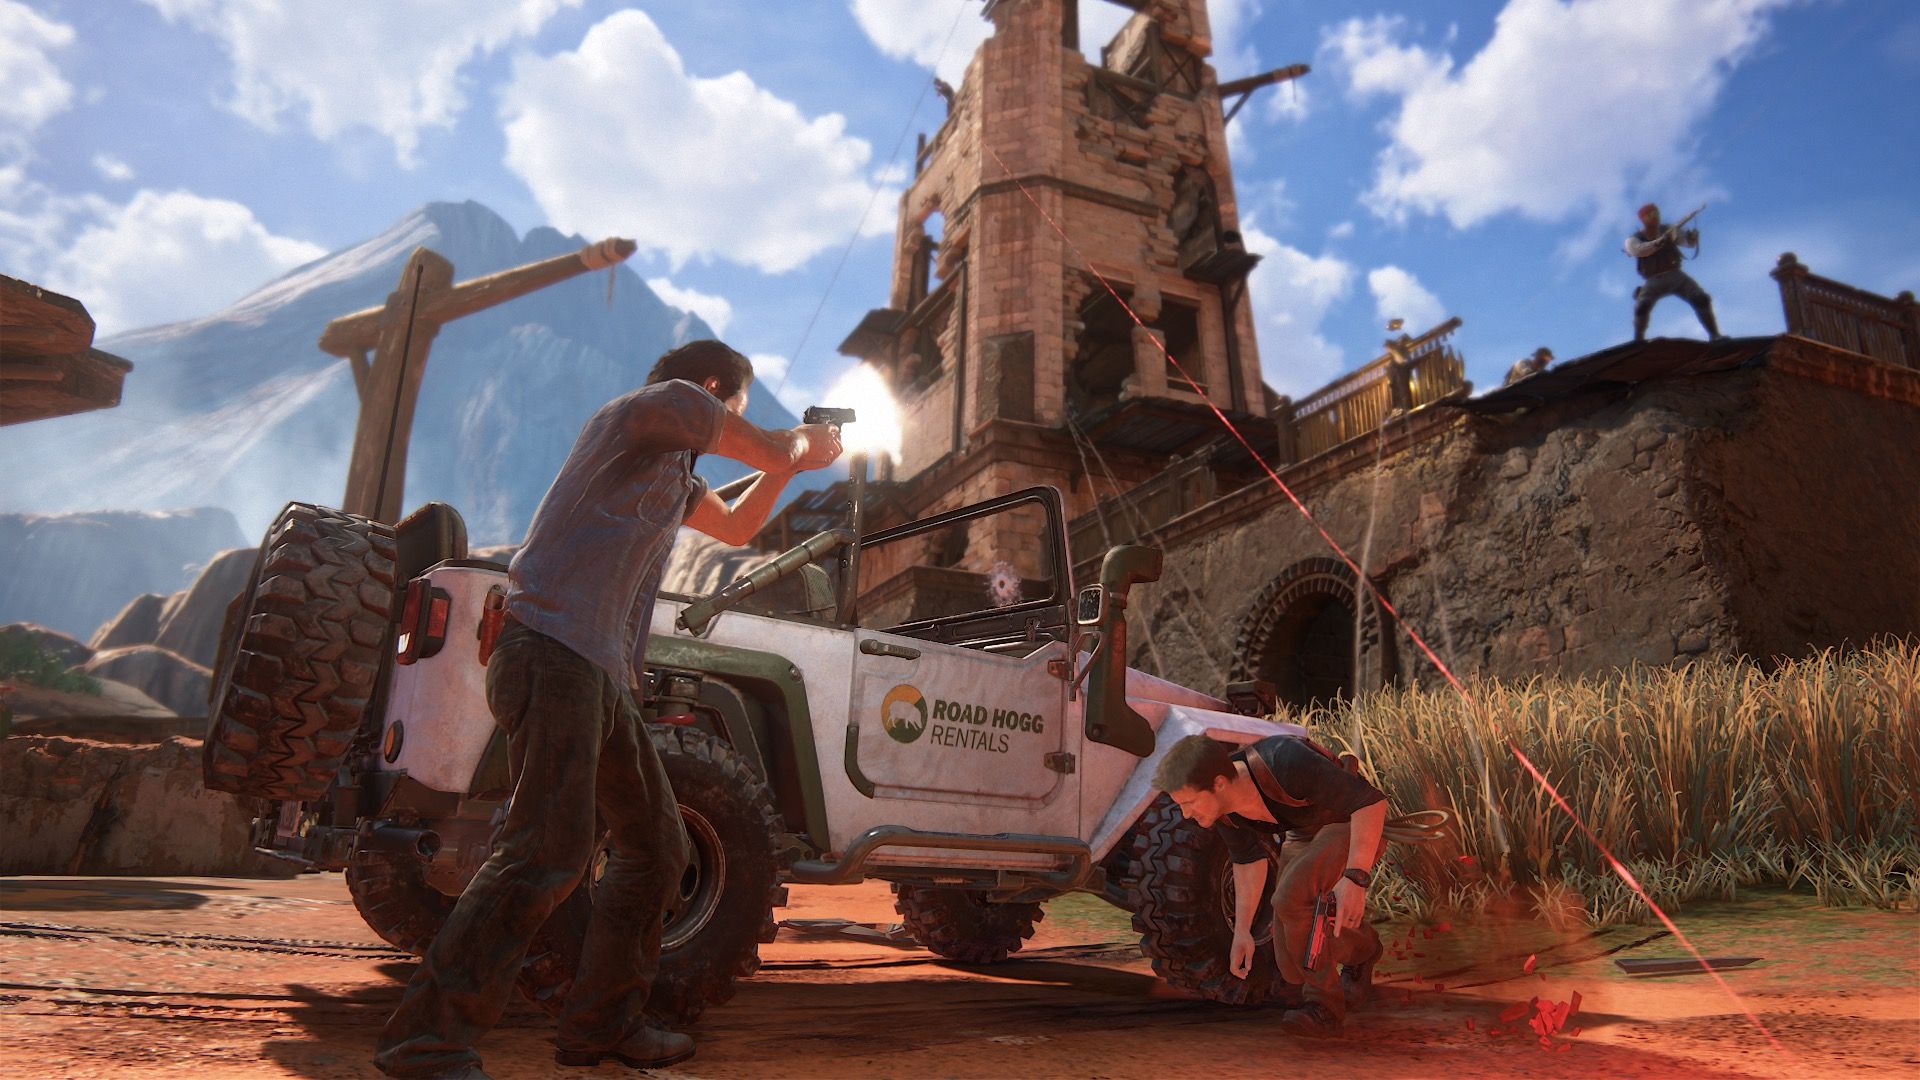 Uncharted-4-A-Thiefs-End_2016_04-04-16_005